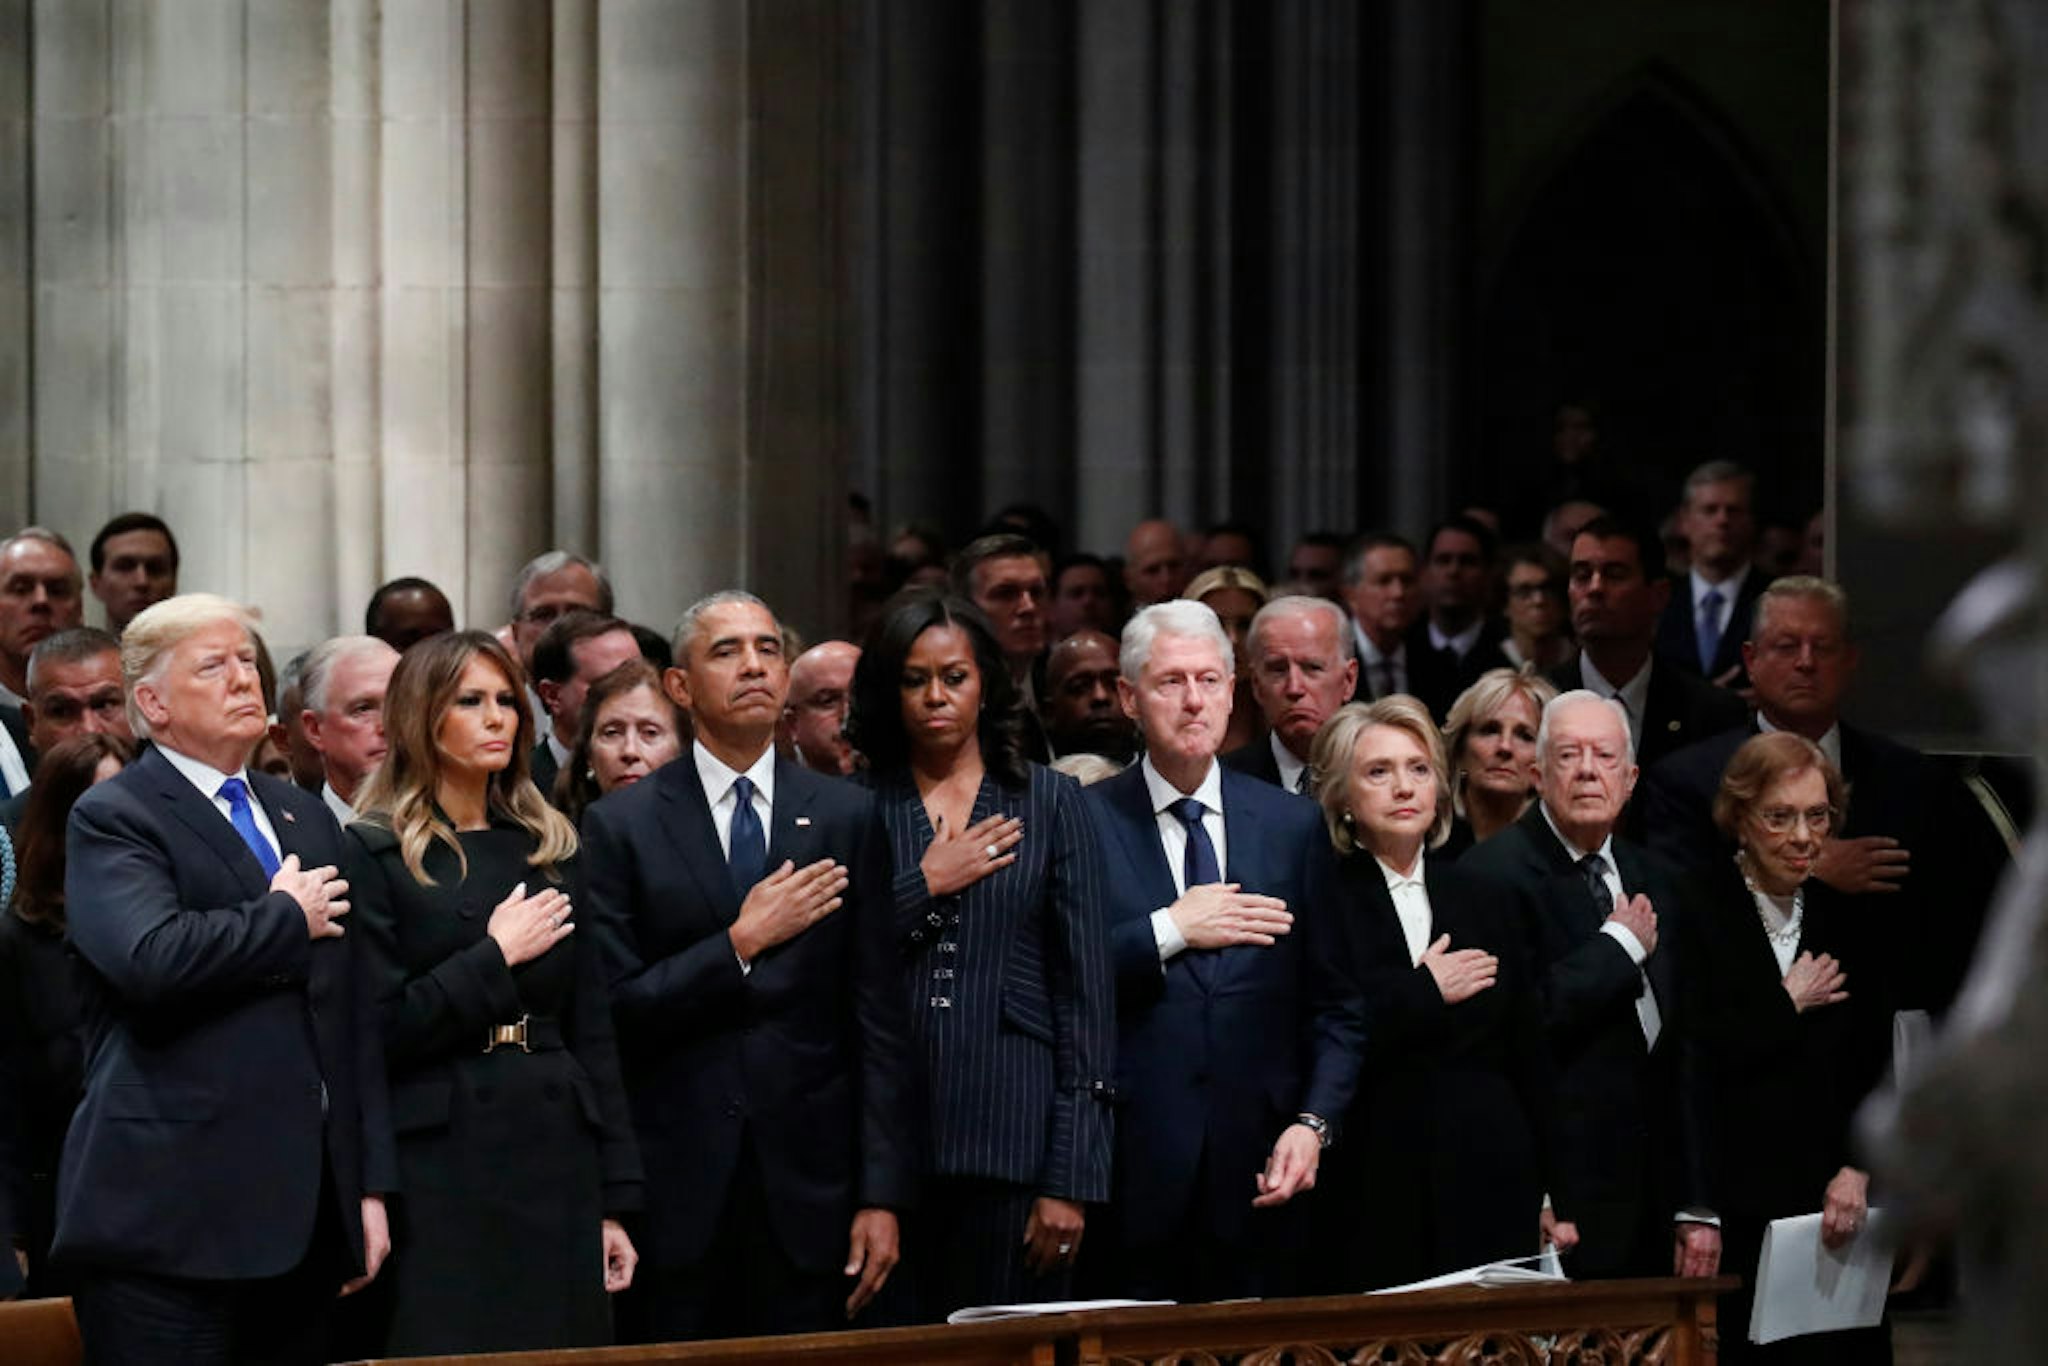 WASHINGTON, DC - DECEMBER 05: (AFP OUT) From left, President Donald Trump, first lady Melania Trump, former President Barack Obama, former first lady Michelle Obama, former President Bill Clinton, former Secretary of State Hillary Clinton, and former President Jimmy Carter and former first lady Rosalynn Carter attend the state funeral of former U.S. President George H. W. Bush at the Washington National Cathedral on December 5, 2018 in Washington, DC. President Bush will be buried at his final resting place at the George H.W. Bush Presidential Library at Texas A&amp;M University in College Station, Texas. A WWII combat veteran, Bush served as a member of Congress from Texas, ambassador to the United Nations, director of the CIA, vice president and 41st president of the United States. (Photo by Alex Brandon - Pool/Getty Images)